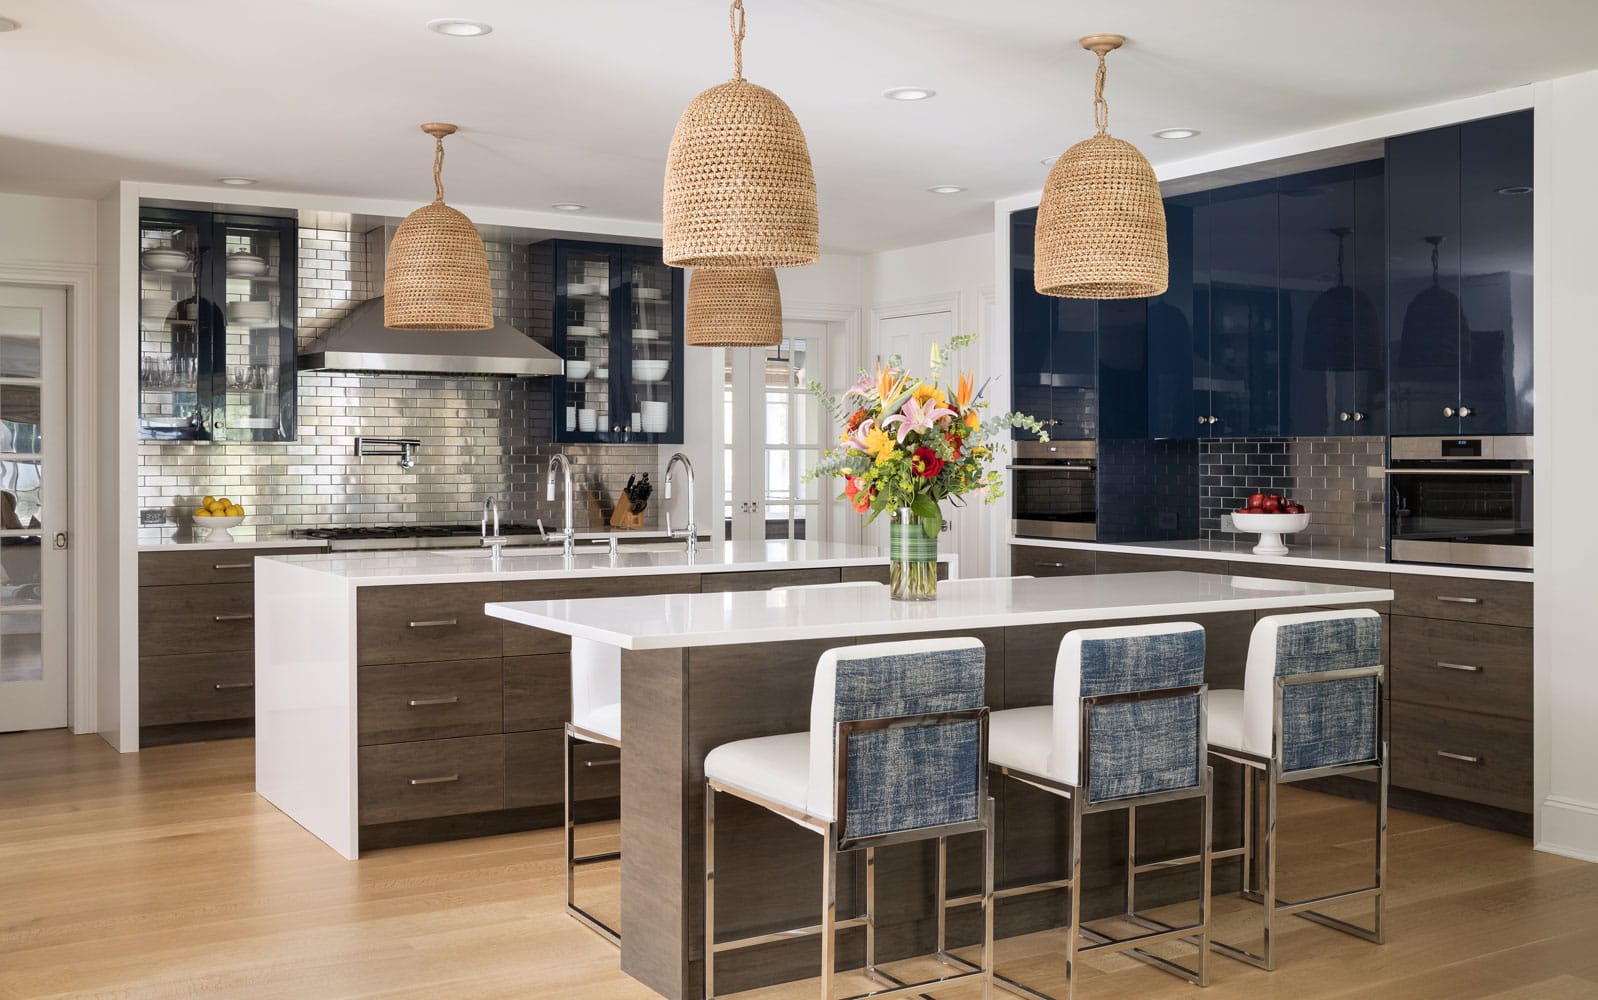 Double island kitchen design in North Shore of Long Island by Annette Jaffe Interiors